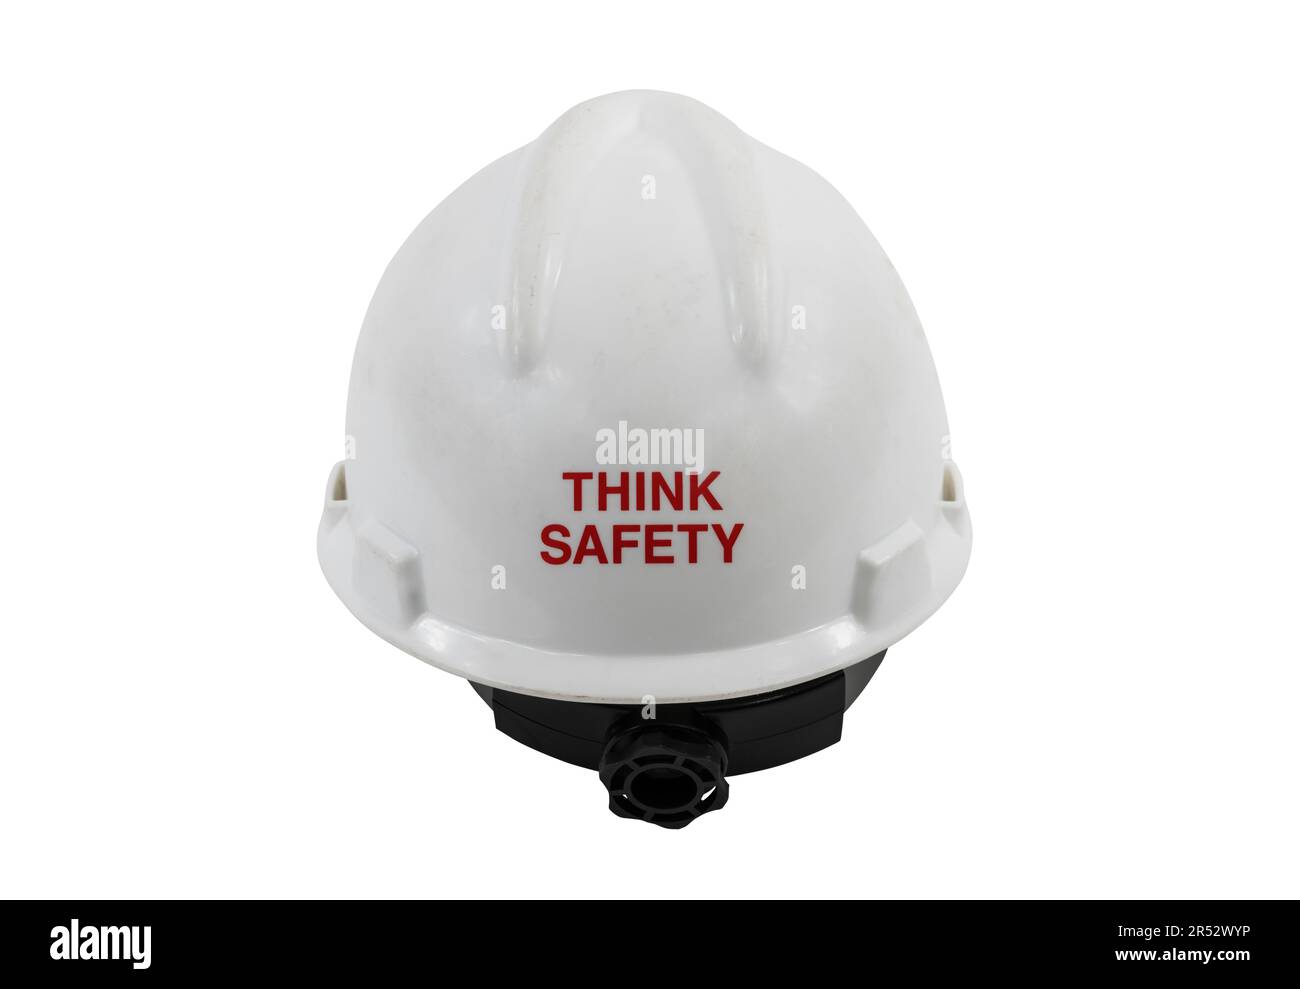 Think safety hard hat.  Worker protective helmet.  Isolated with cut out background. Stock Photo